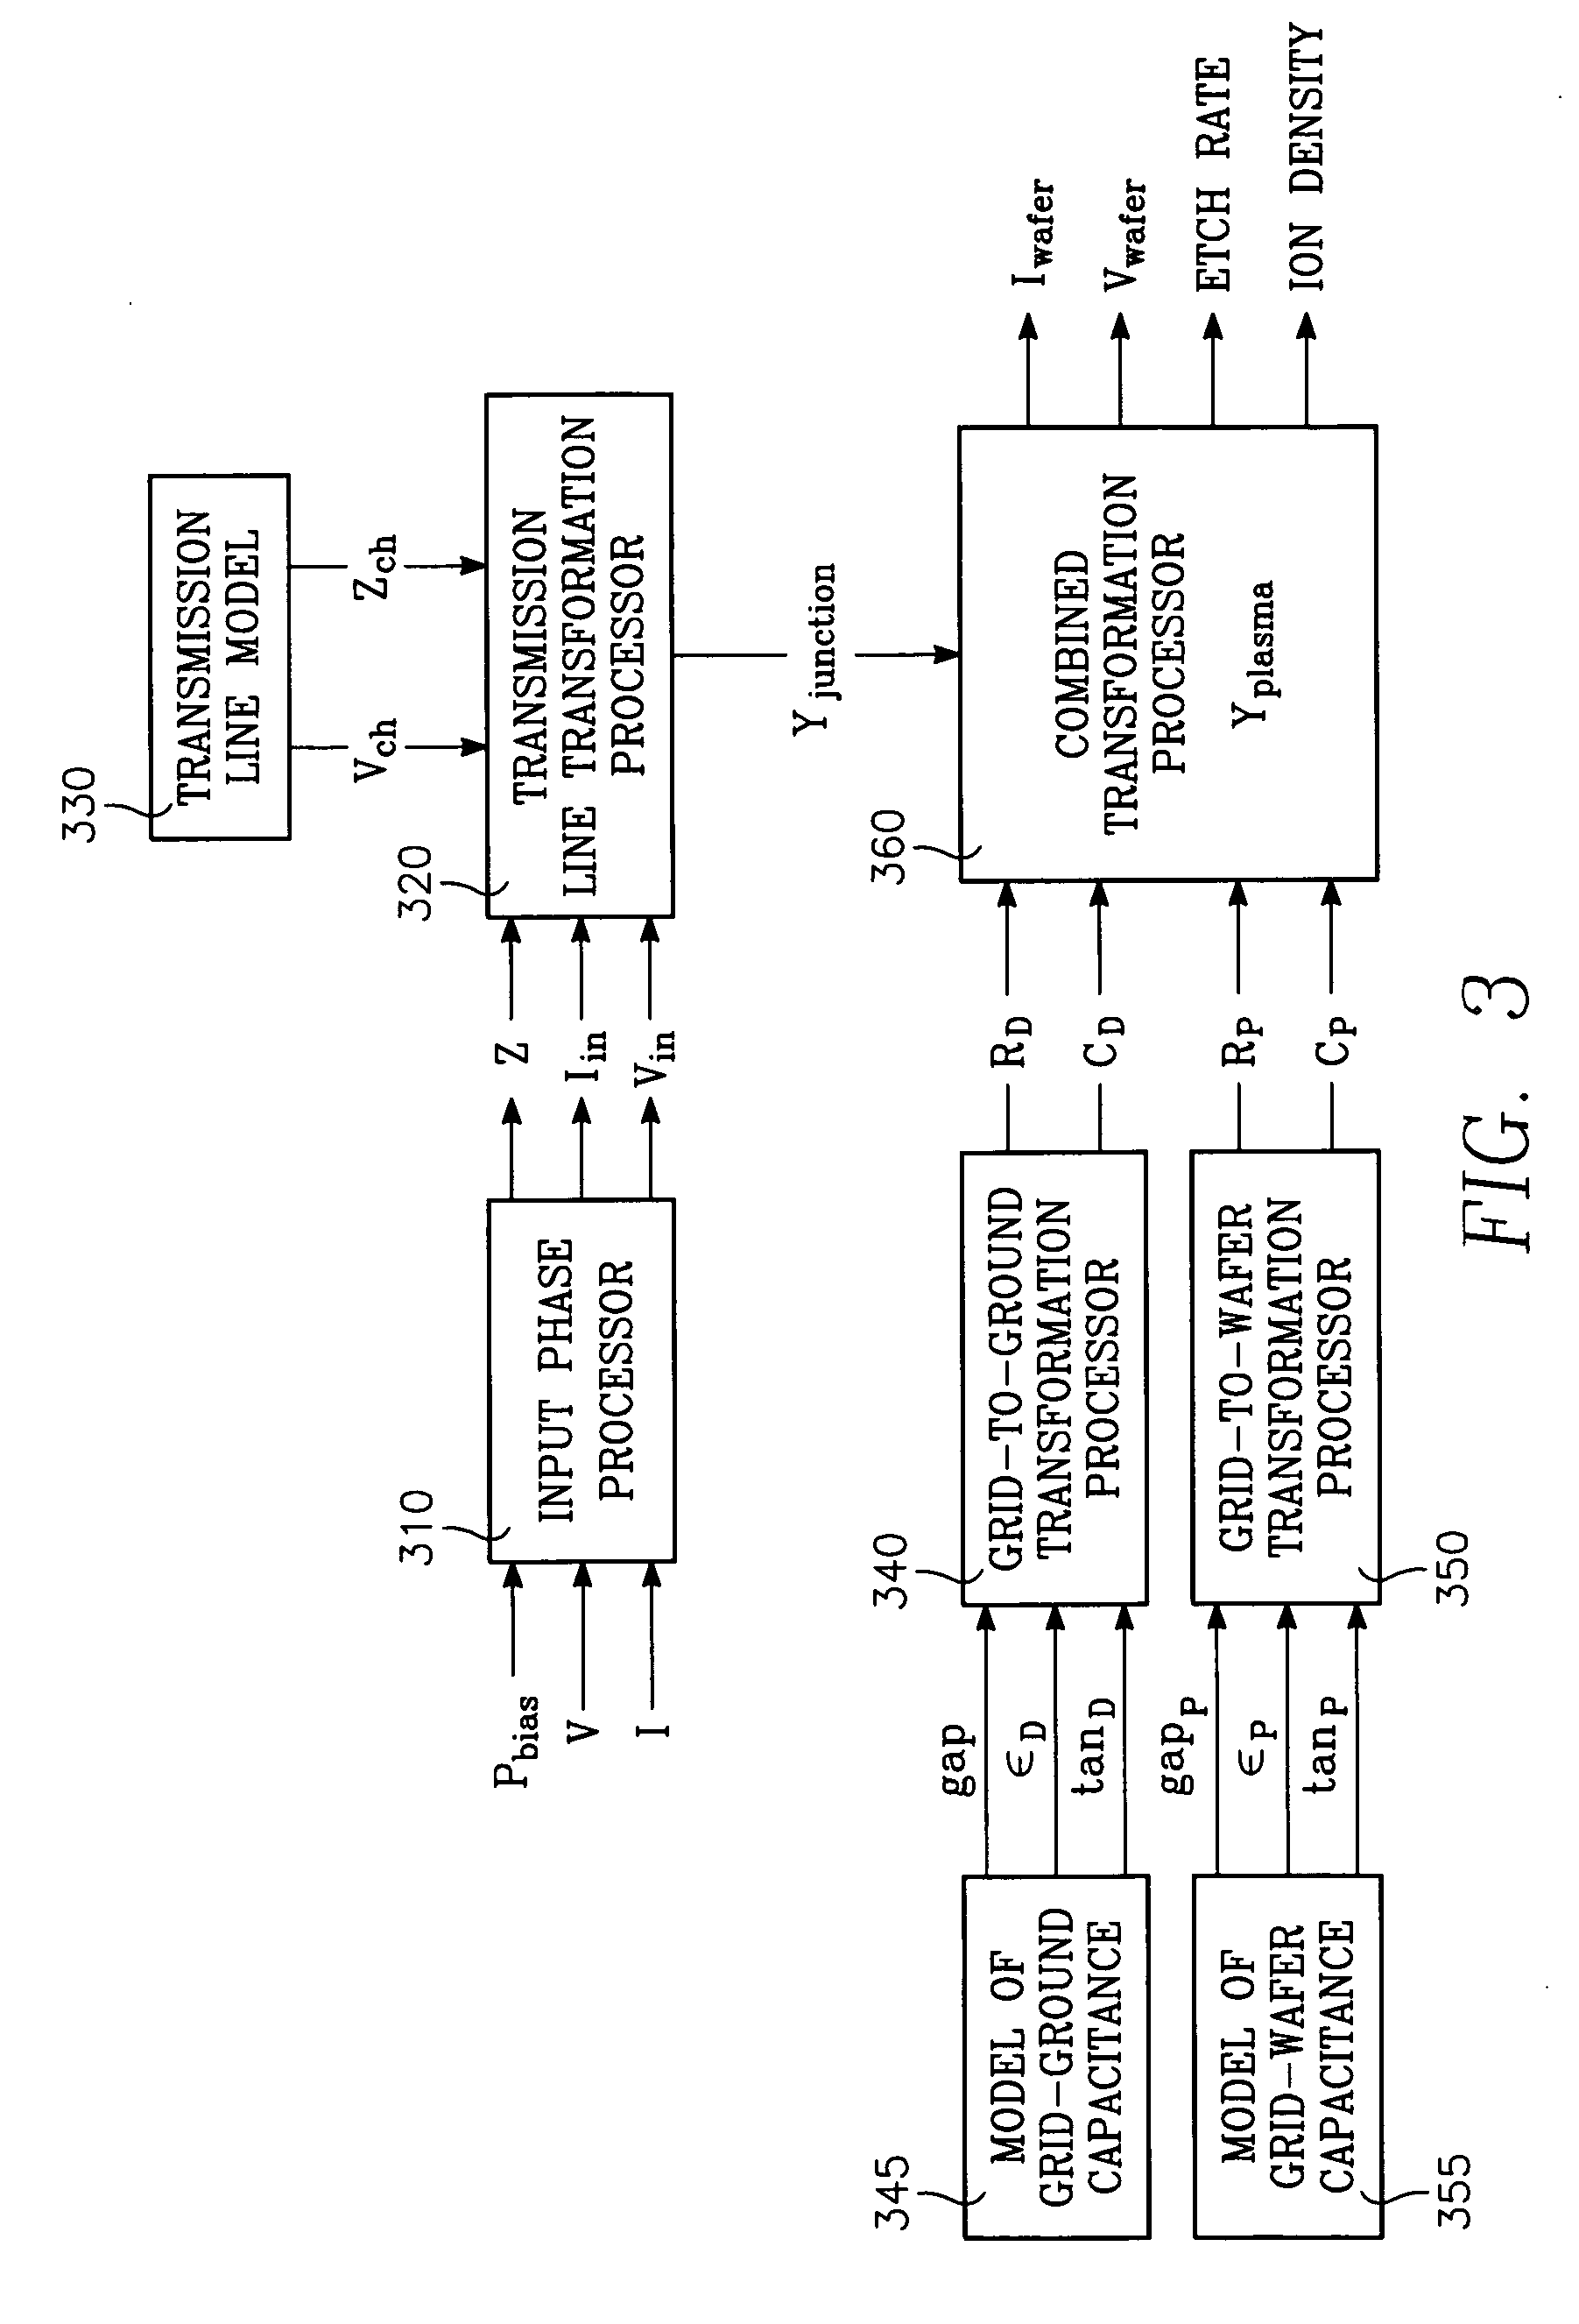 Method of determining plasma ion density, wafer voltage, etch rate and wafer current from applied bias voltage and current